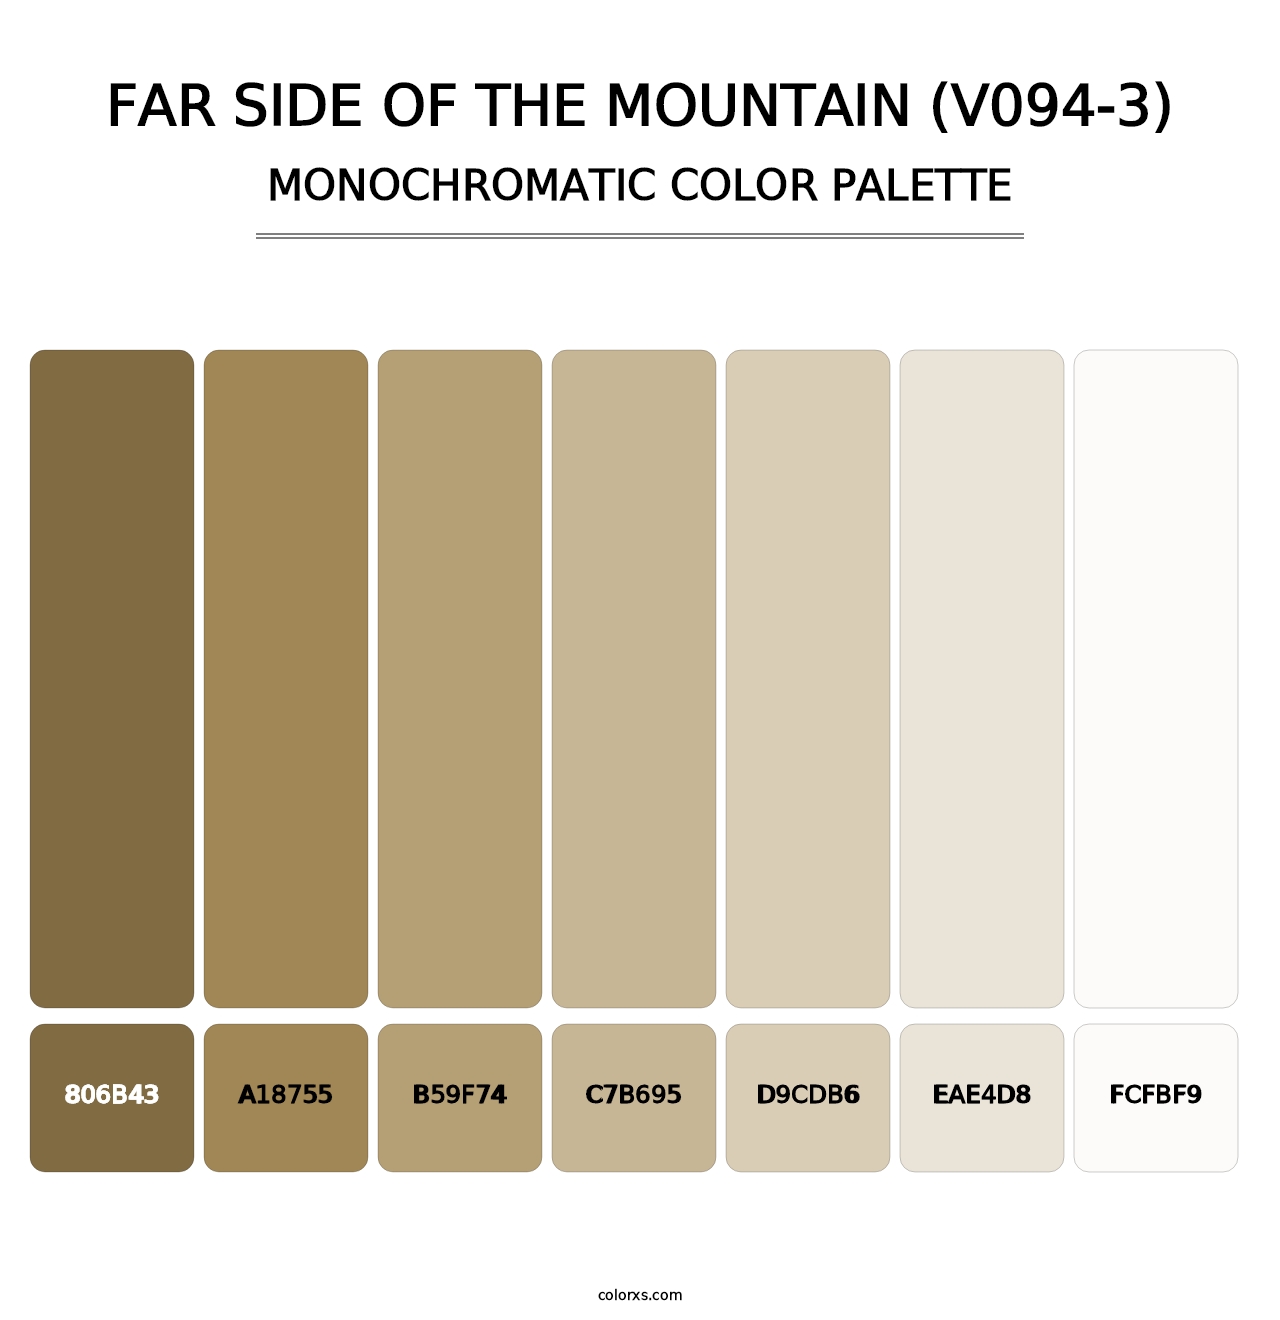 Far Side of the Mountain (V094-3) - Monochromatic Color Palette